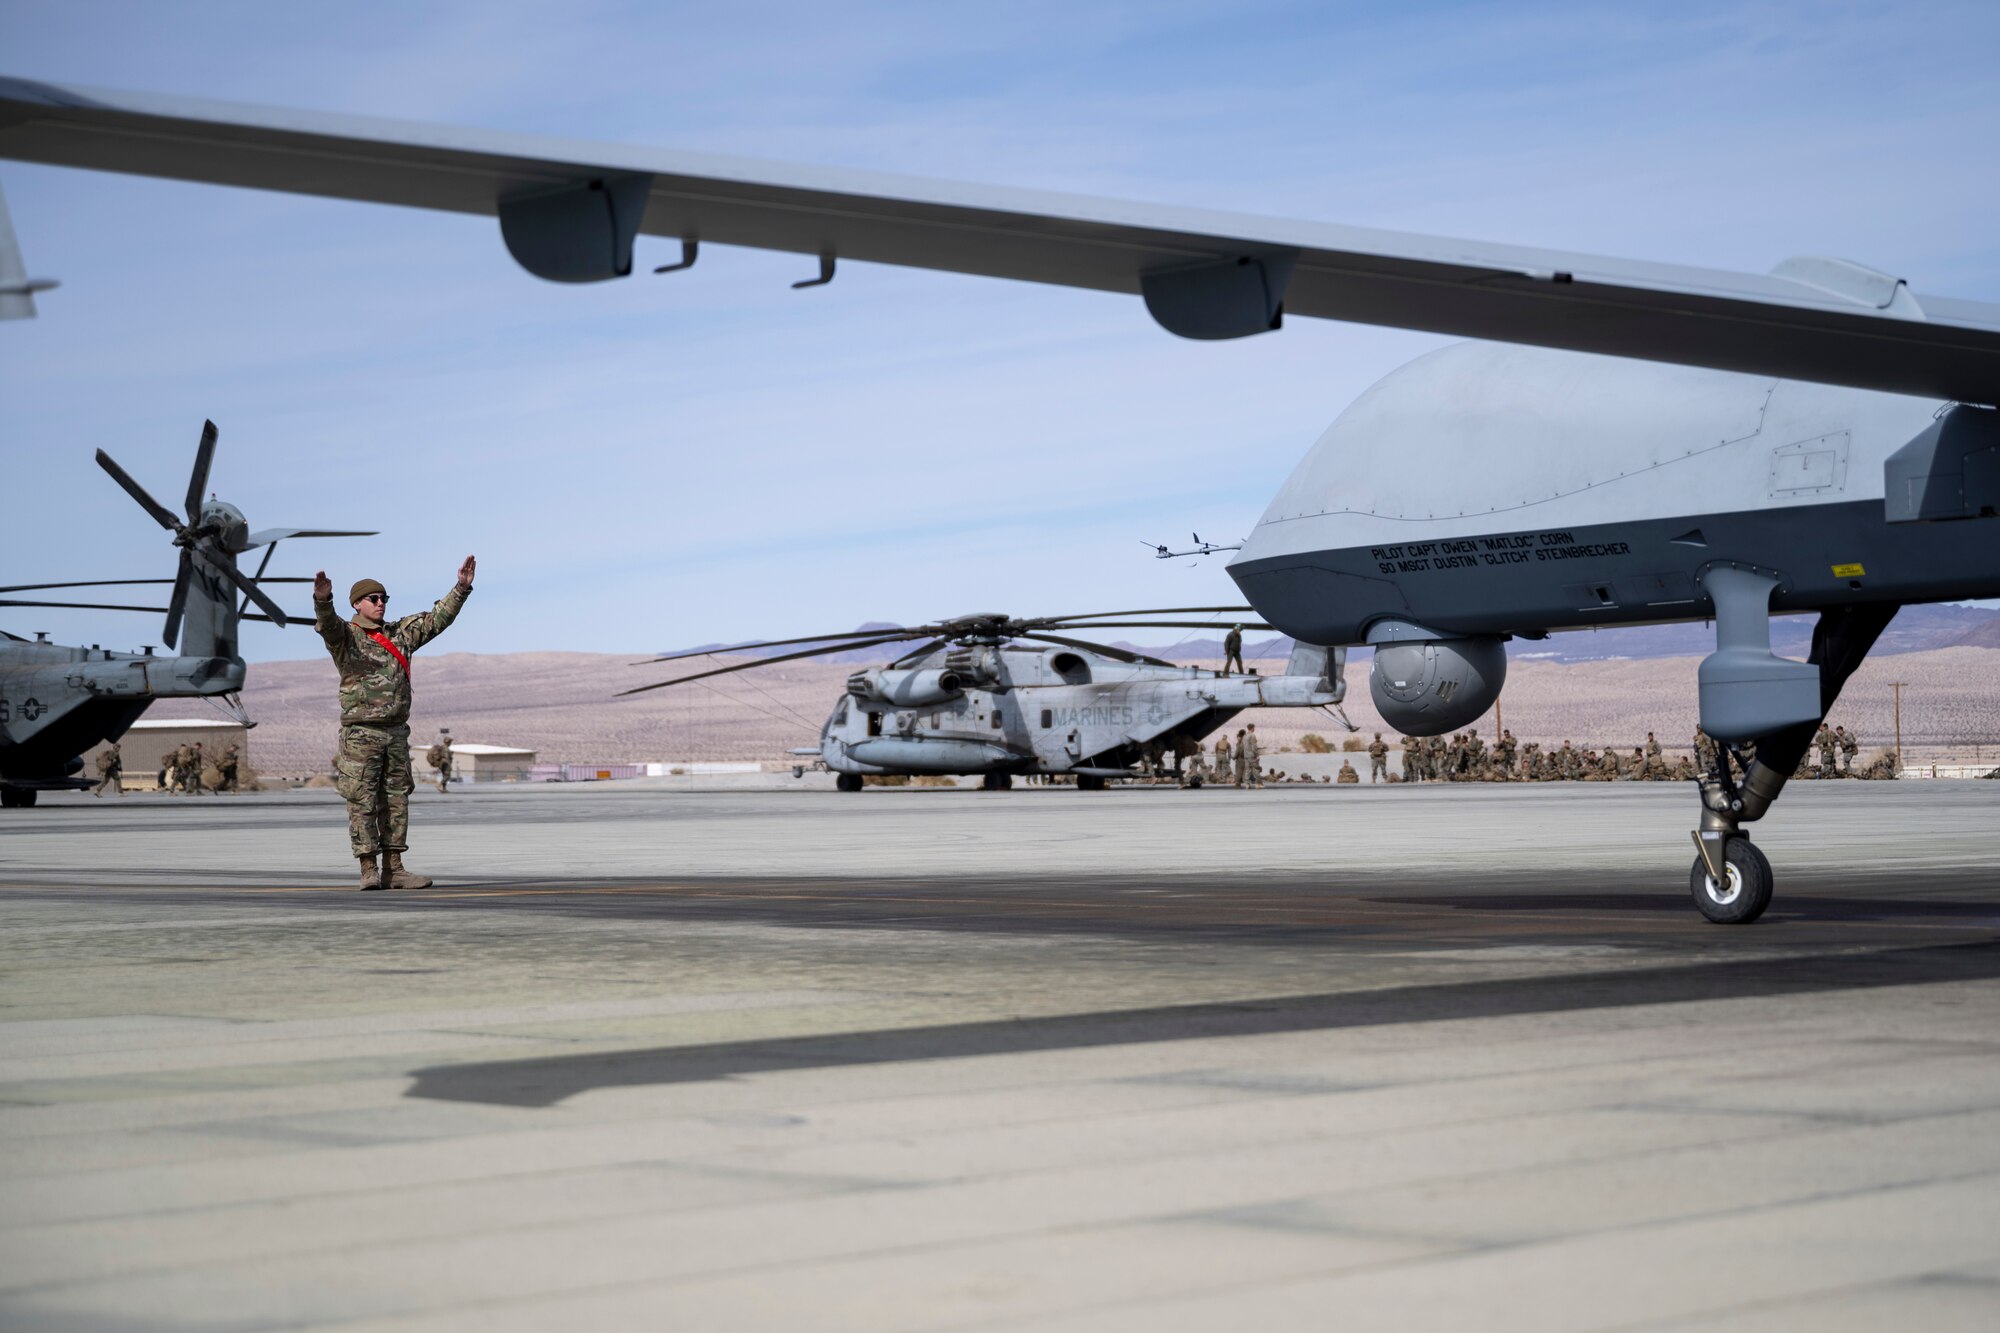 U.S. Air Force Senior Airman Kyle Thompson, 29th Aircraft Maintenance Unit systems apprentice, marshals an MQ-9 Reaper at Marine Corps Air Ground Combat Command Center, Twentynine Palms, California, Feb. 16, 2023. Agile Combat Employment Reaper involved the use of Holloman MQ-9s and U.S. Marine Corps CH-53E Super Stallions. (U.S. Air Force photo by Staff Sgt. Kristin West)